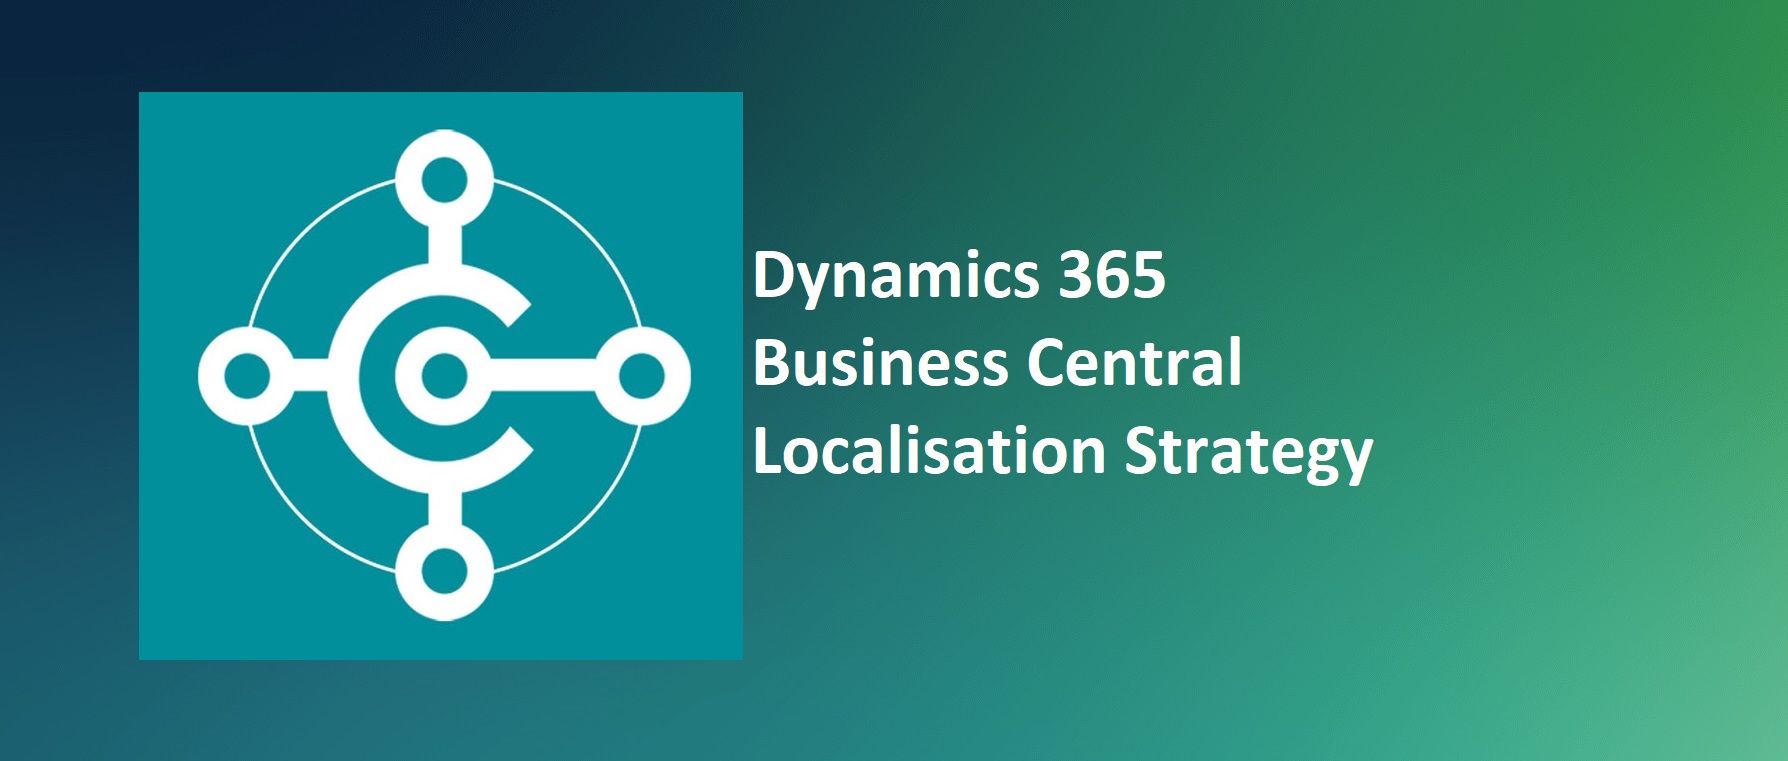 What is the Localisation Strategy for D365 Business Central?